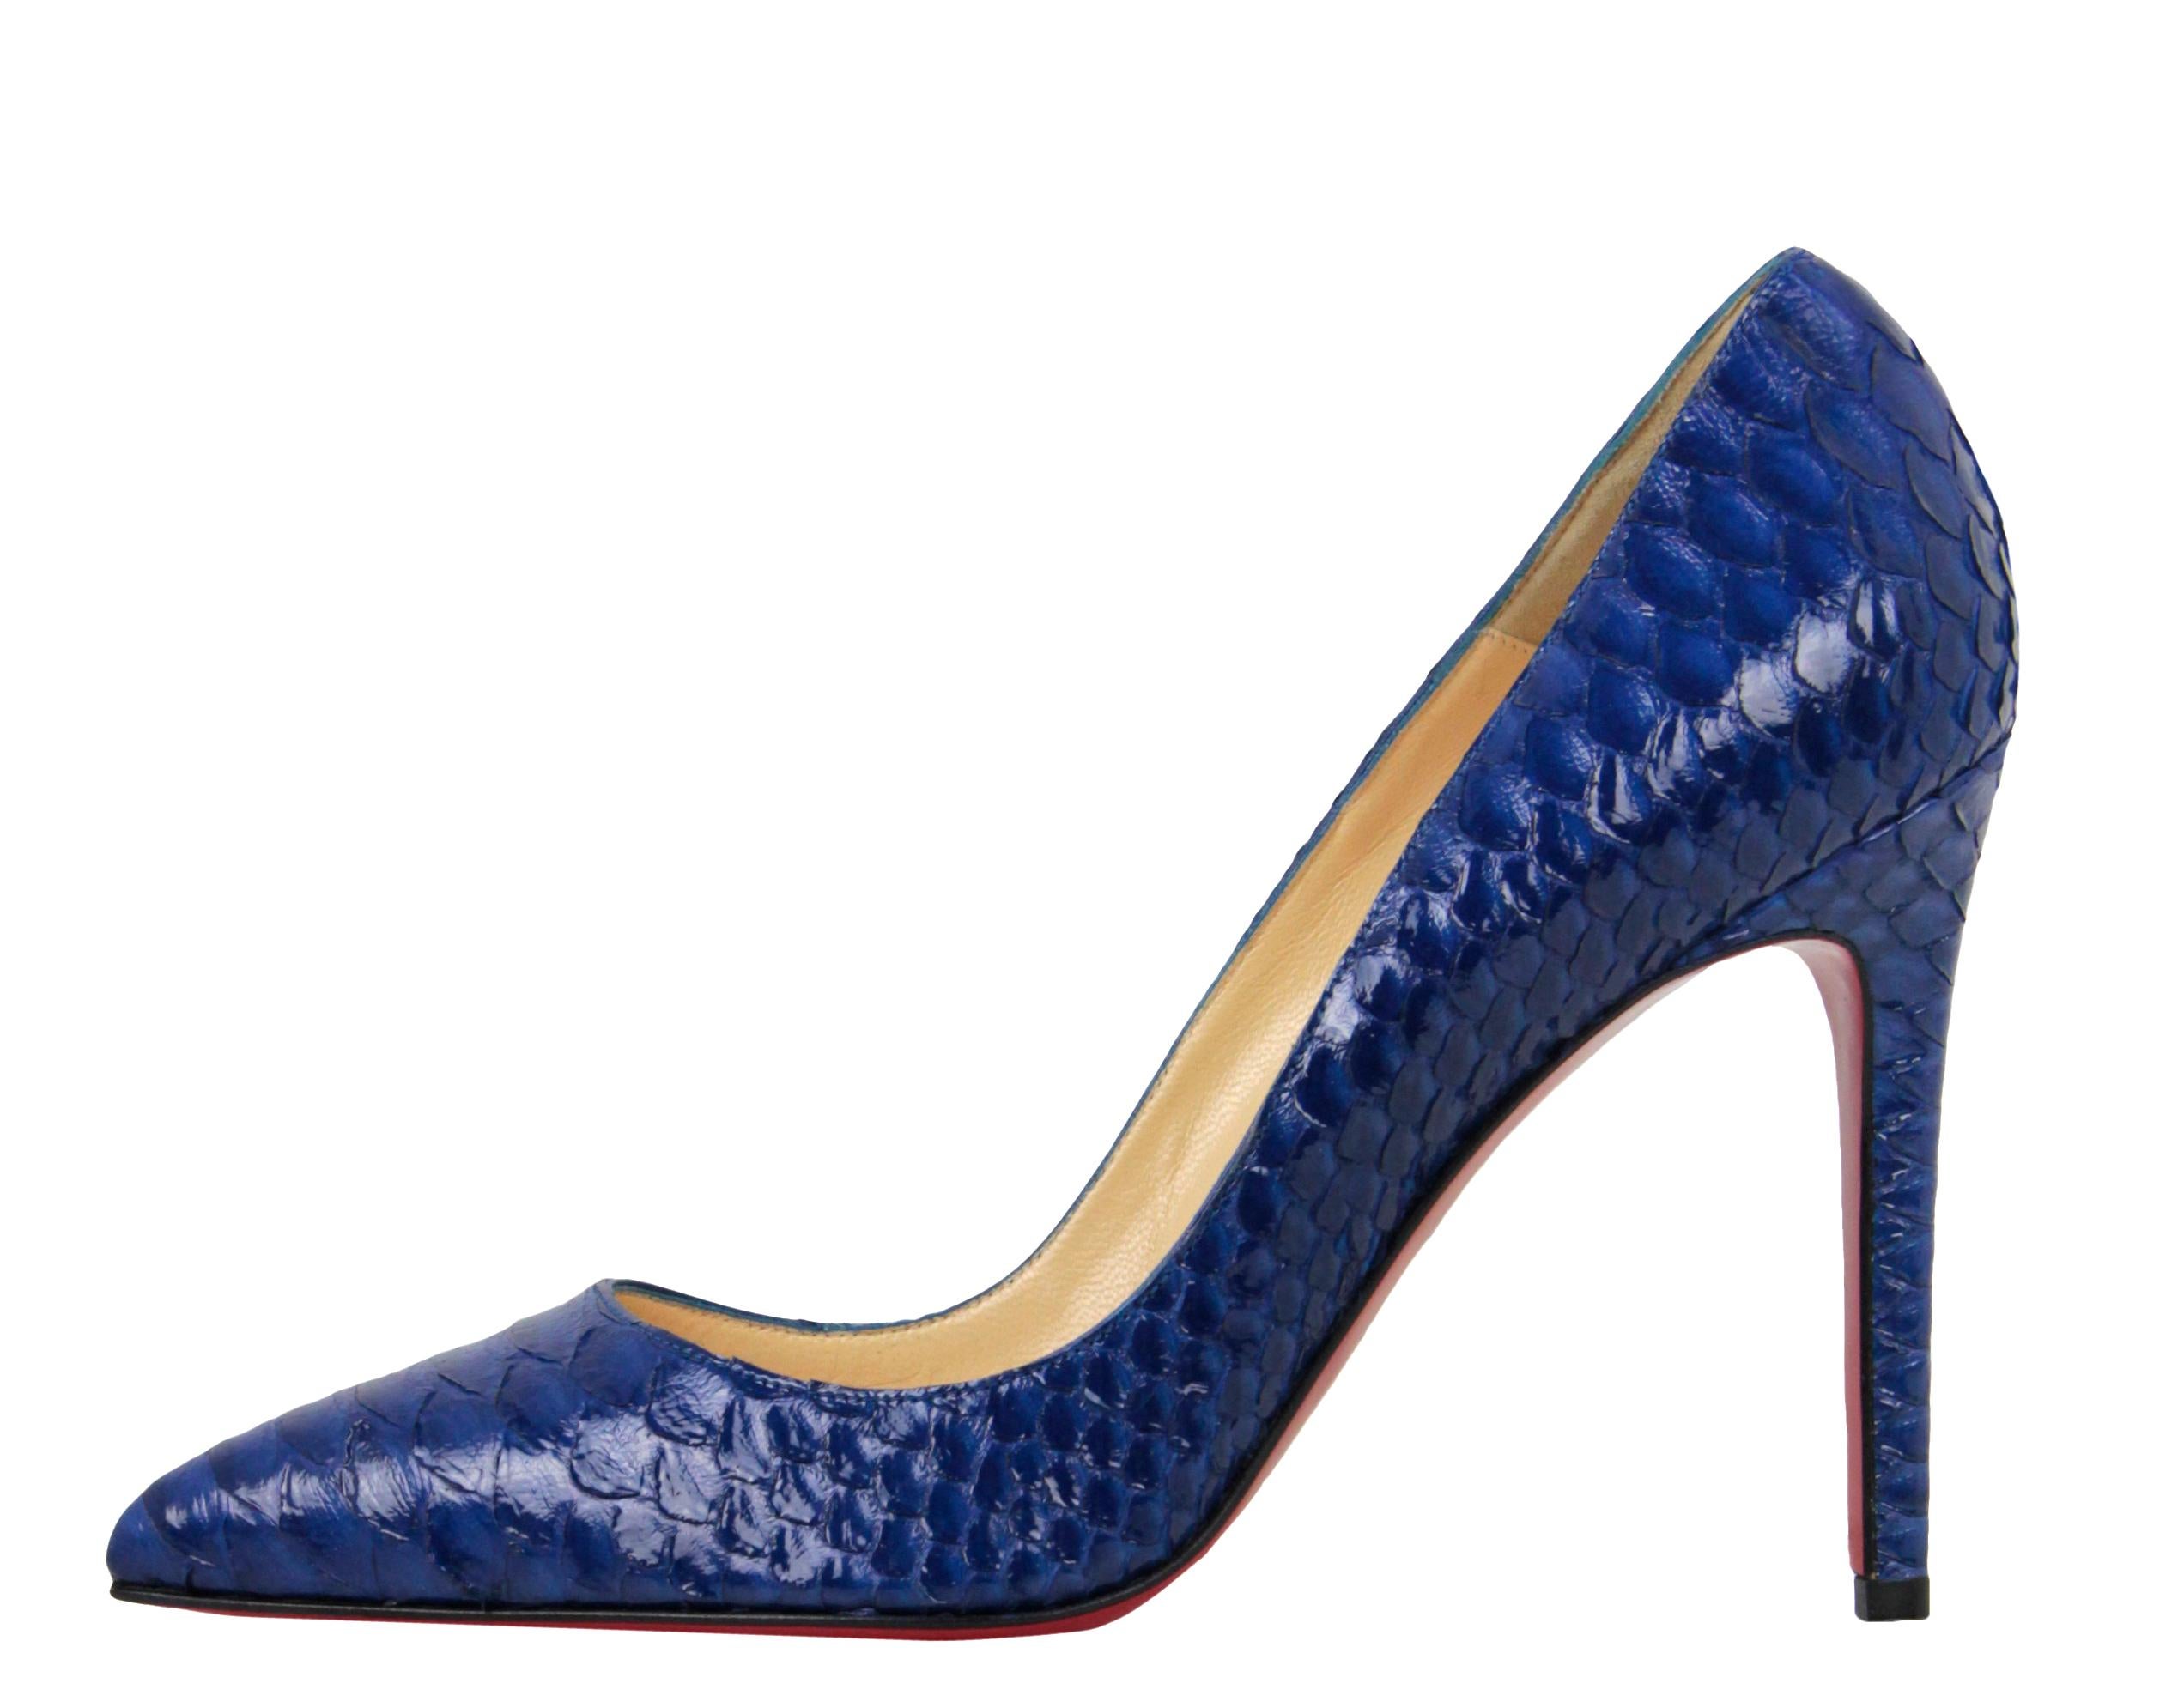 Chritian Louboutin Cobalt Blue Python Pigalle 100mm Pumps 

Made In: Italy
Color: Blue
Materials: Python snakeskin
Overall Condition: New. Missing box and dustbags

Marked Size: 39.5
Heel Height: approximately 4.25